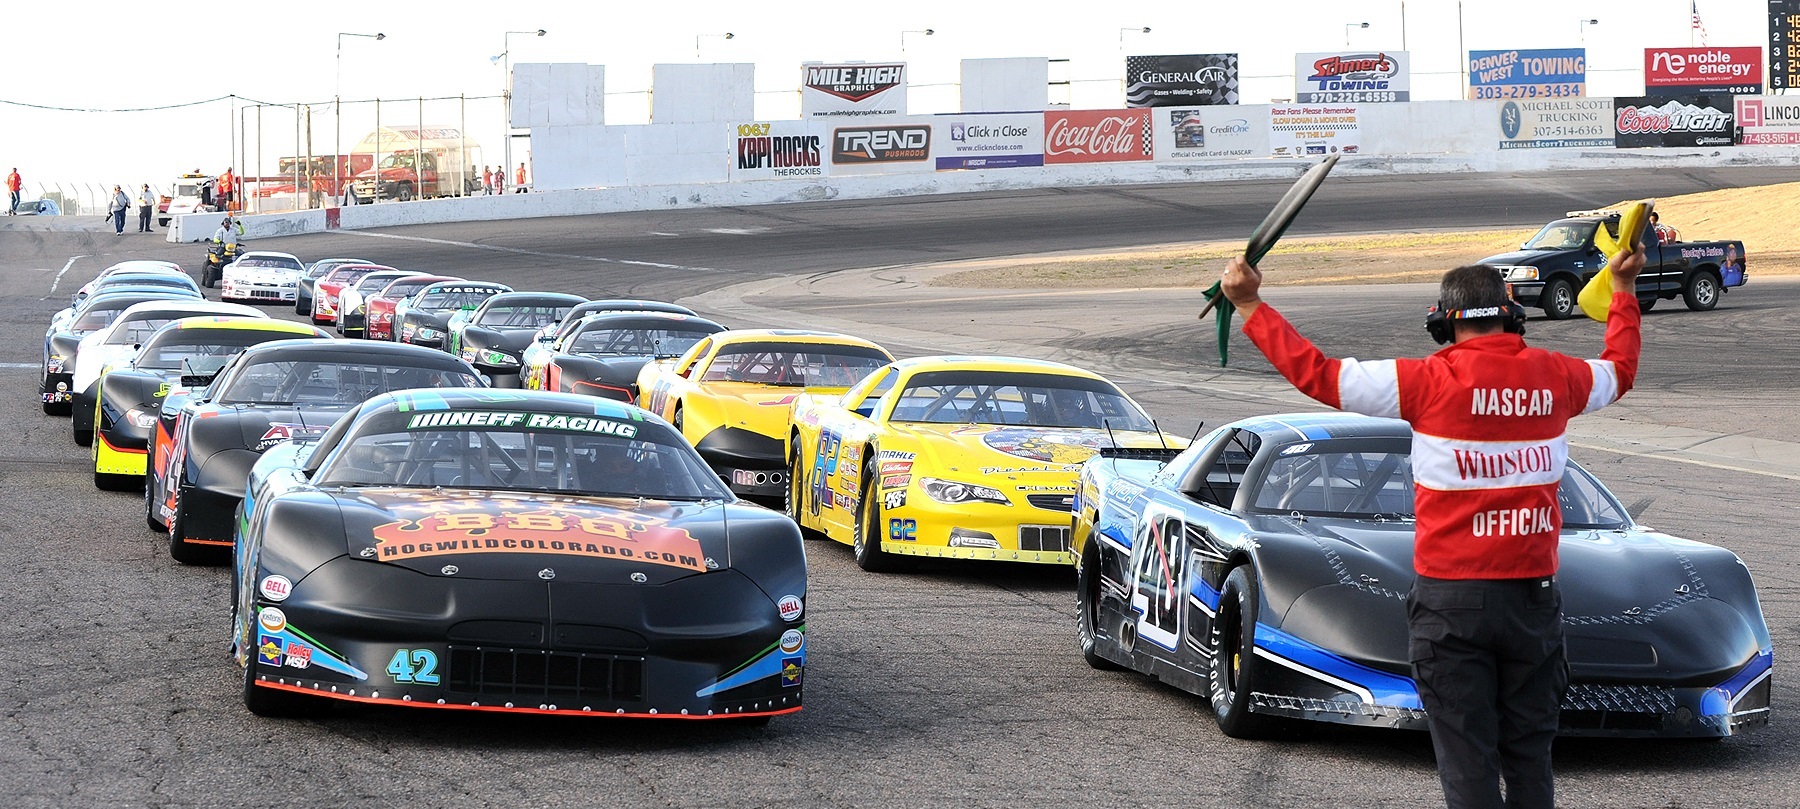 Cars lined up to race at Colorado National Speedway. (Starr photo)